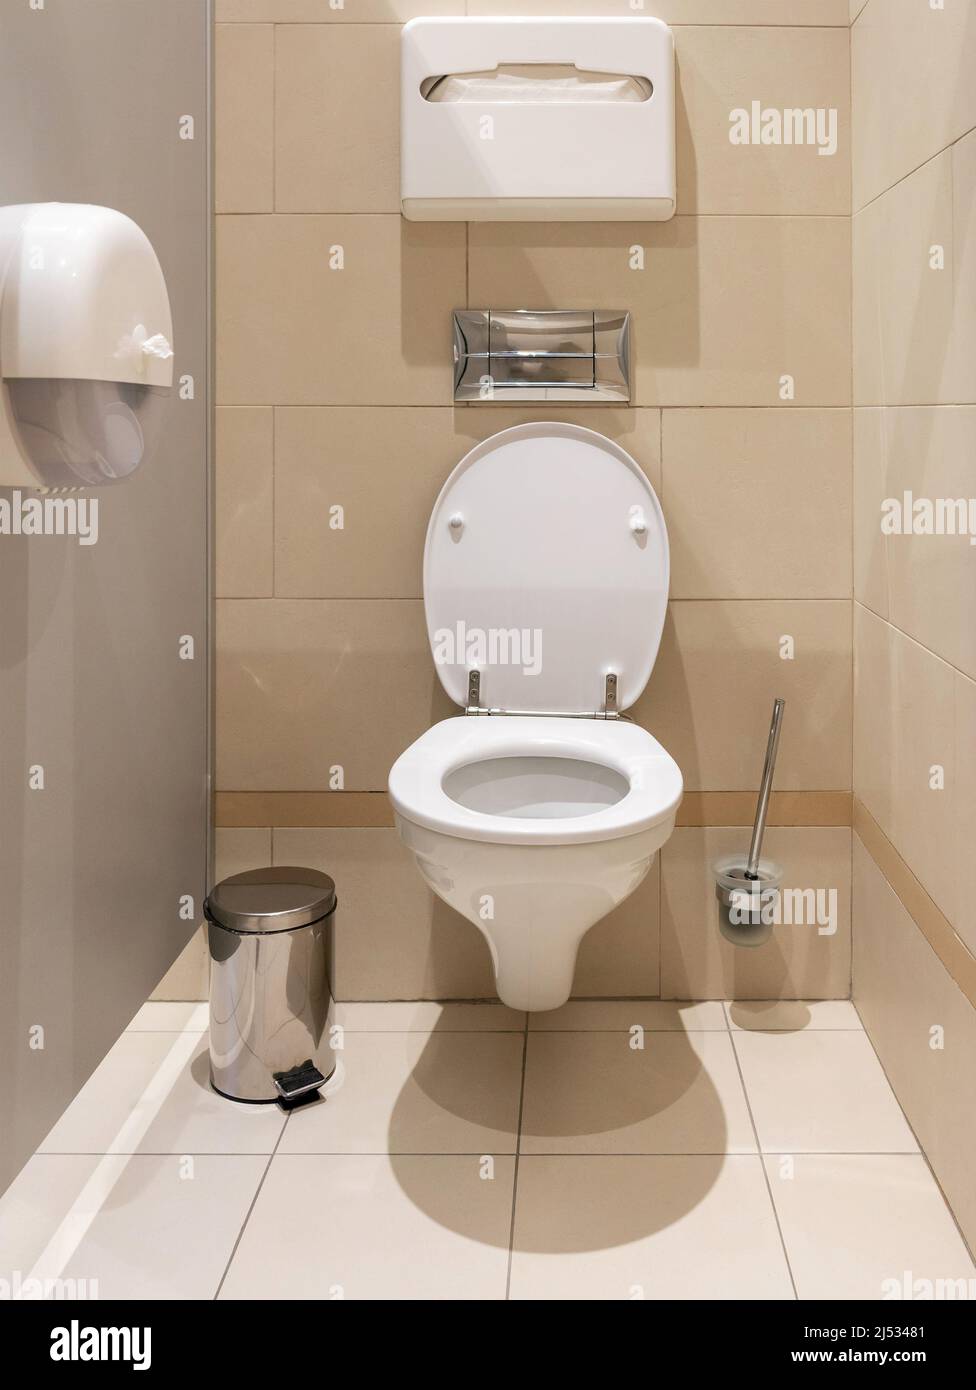 clean toilet cubicle of a public toilet in a hotel Stock Photo